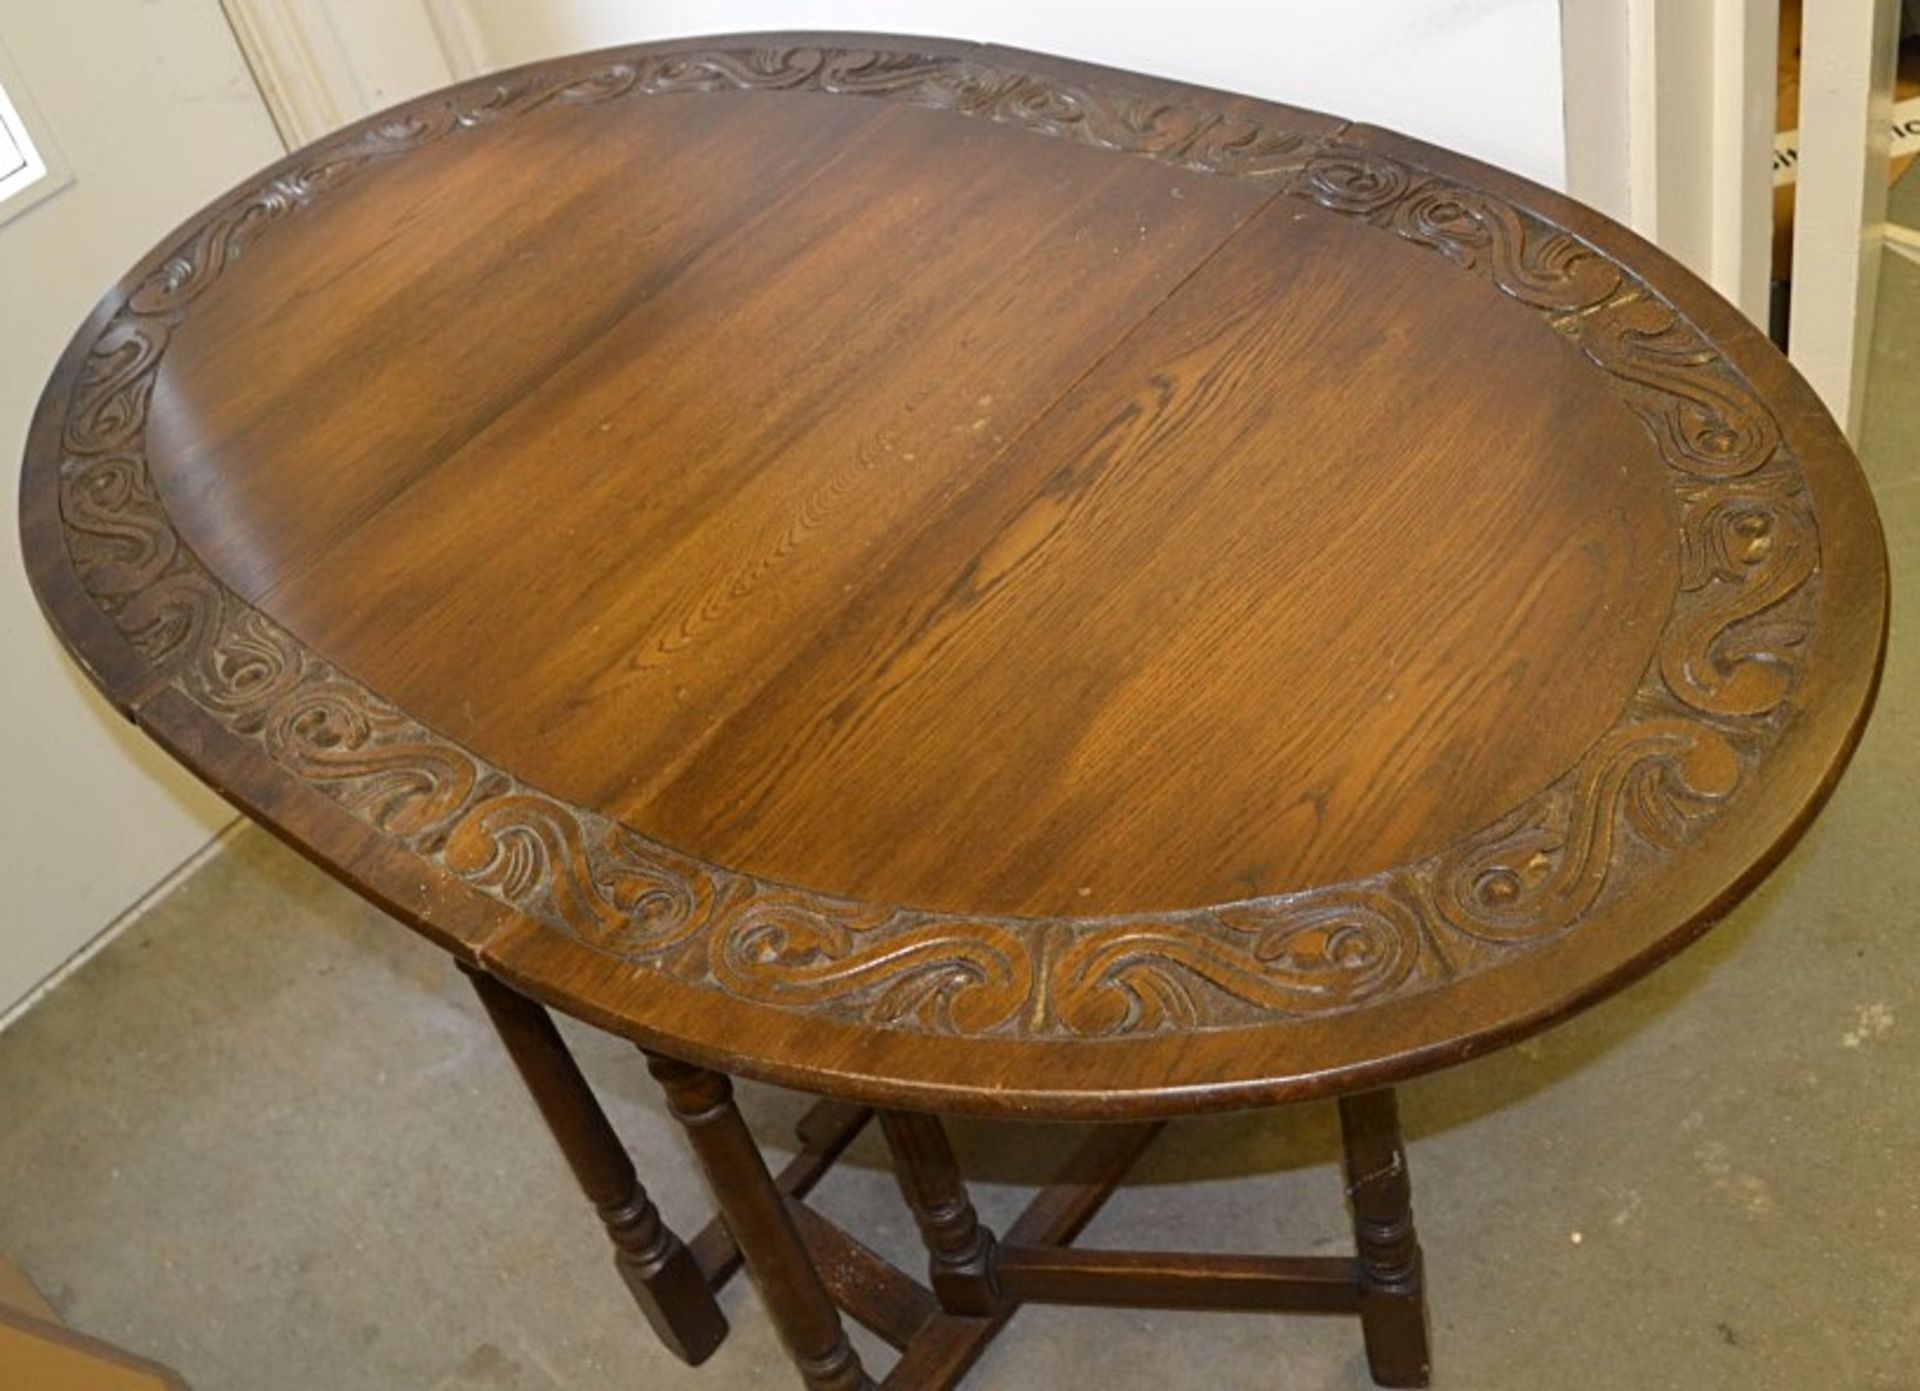 1 x Vintage Drop Leaf Solid Wood Table With Carved Floral Decoration - From A Grade II Listed Hall - Image 8 of 9